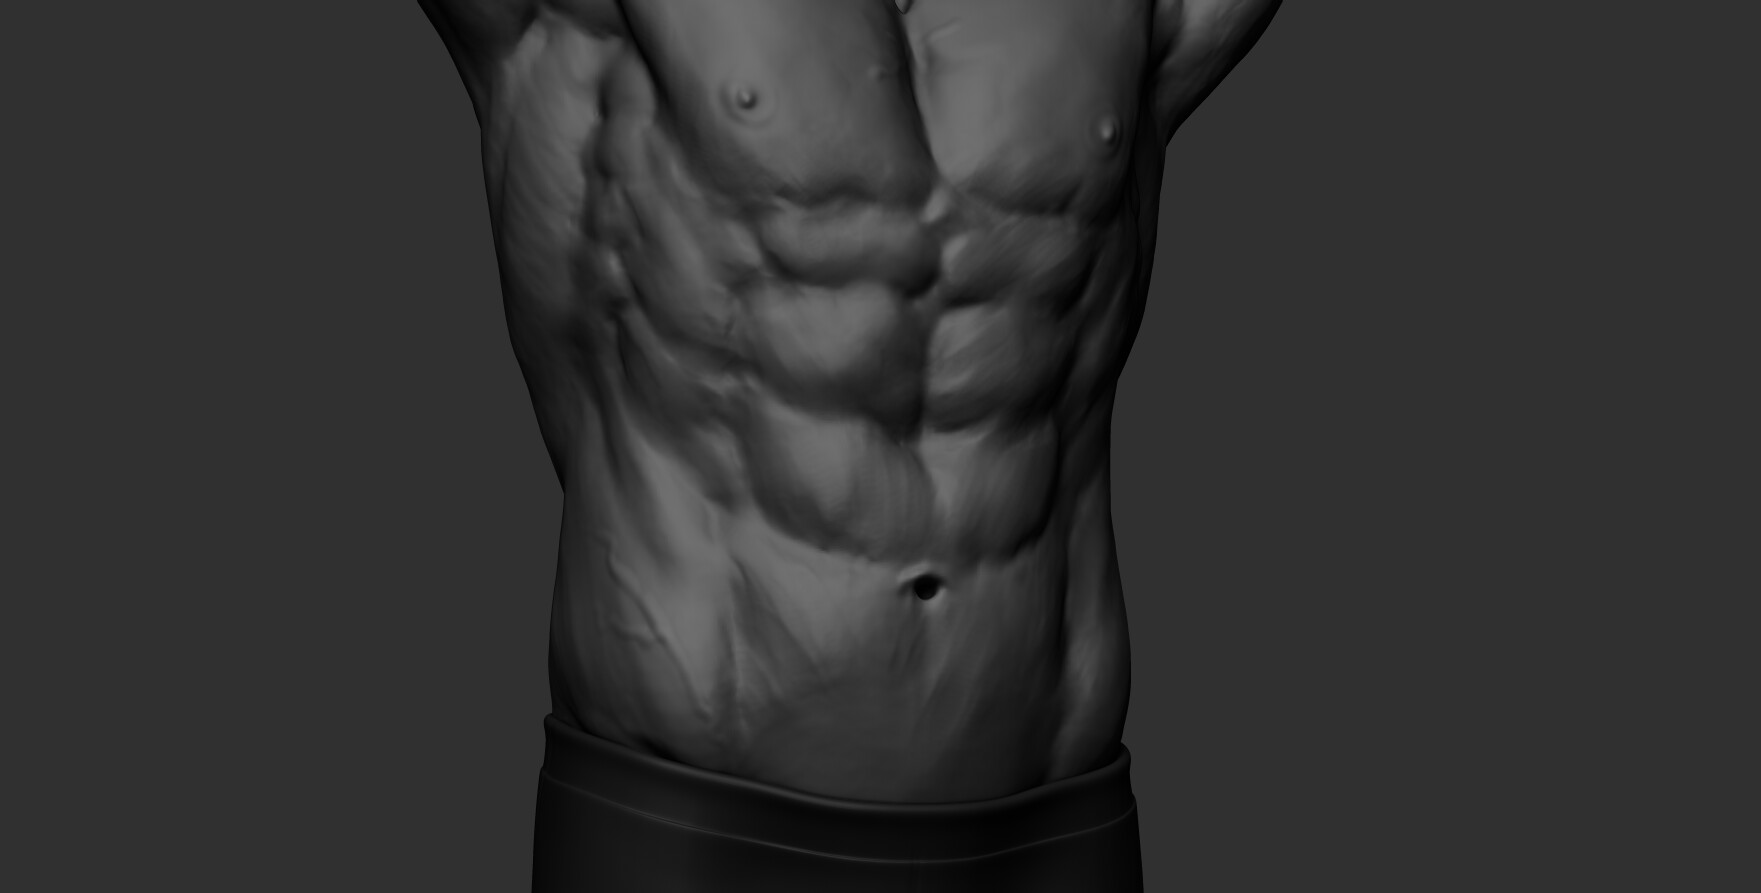 zbrush abs